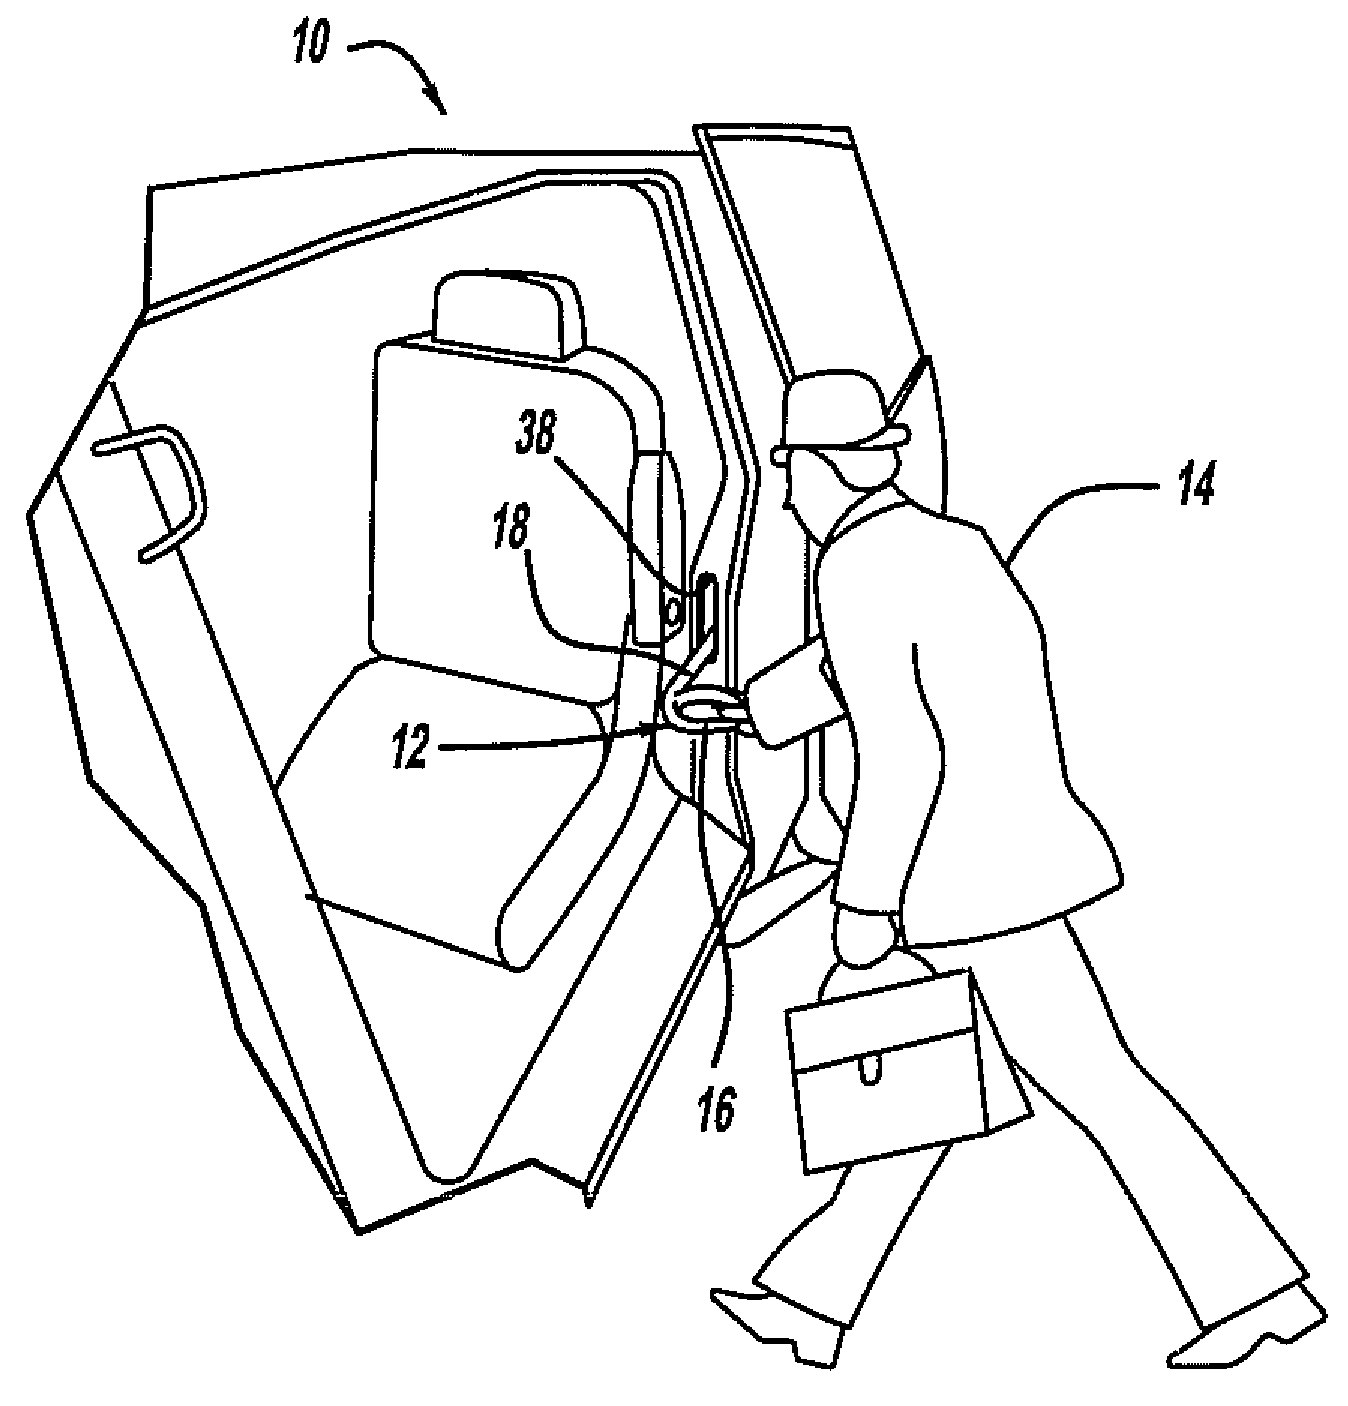 Retractable assist handle for a vehicle